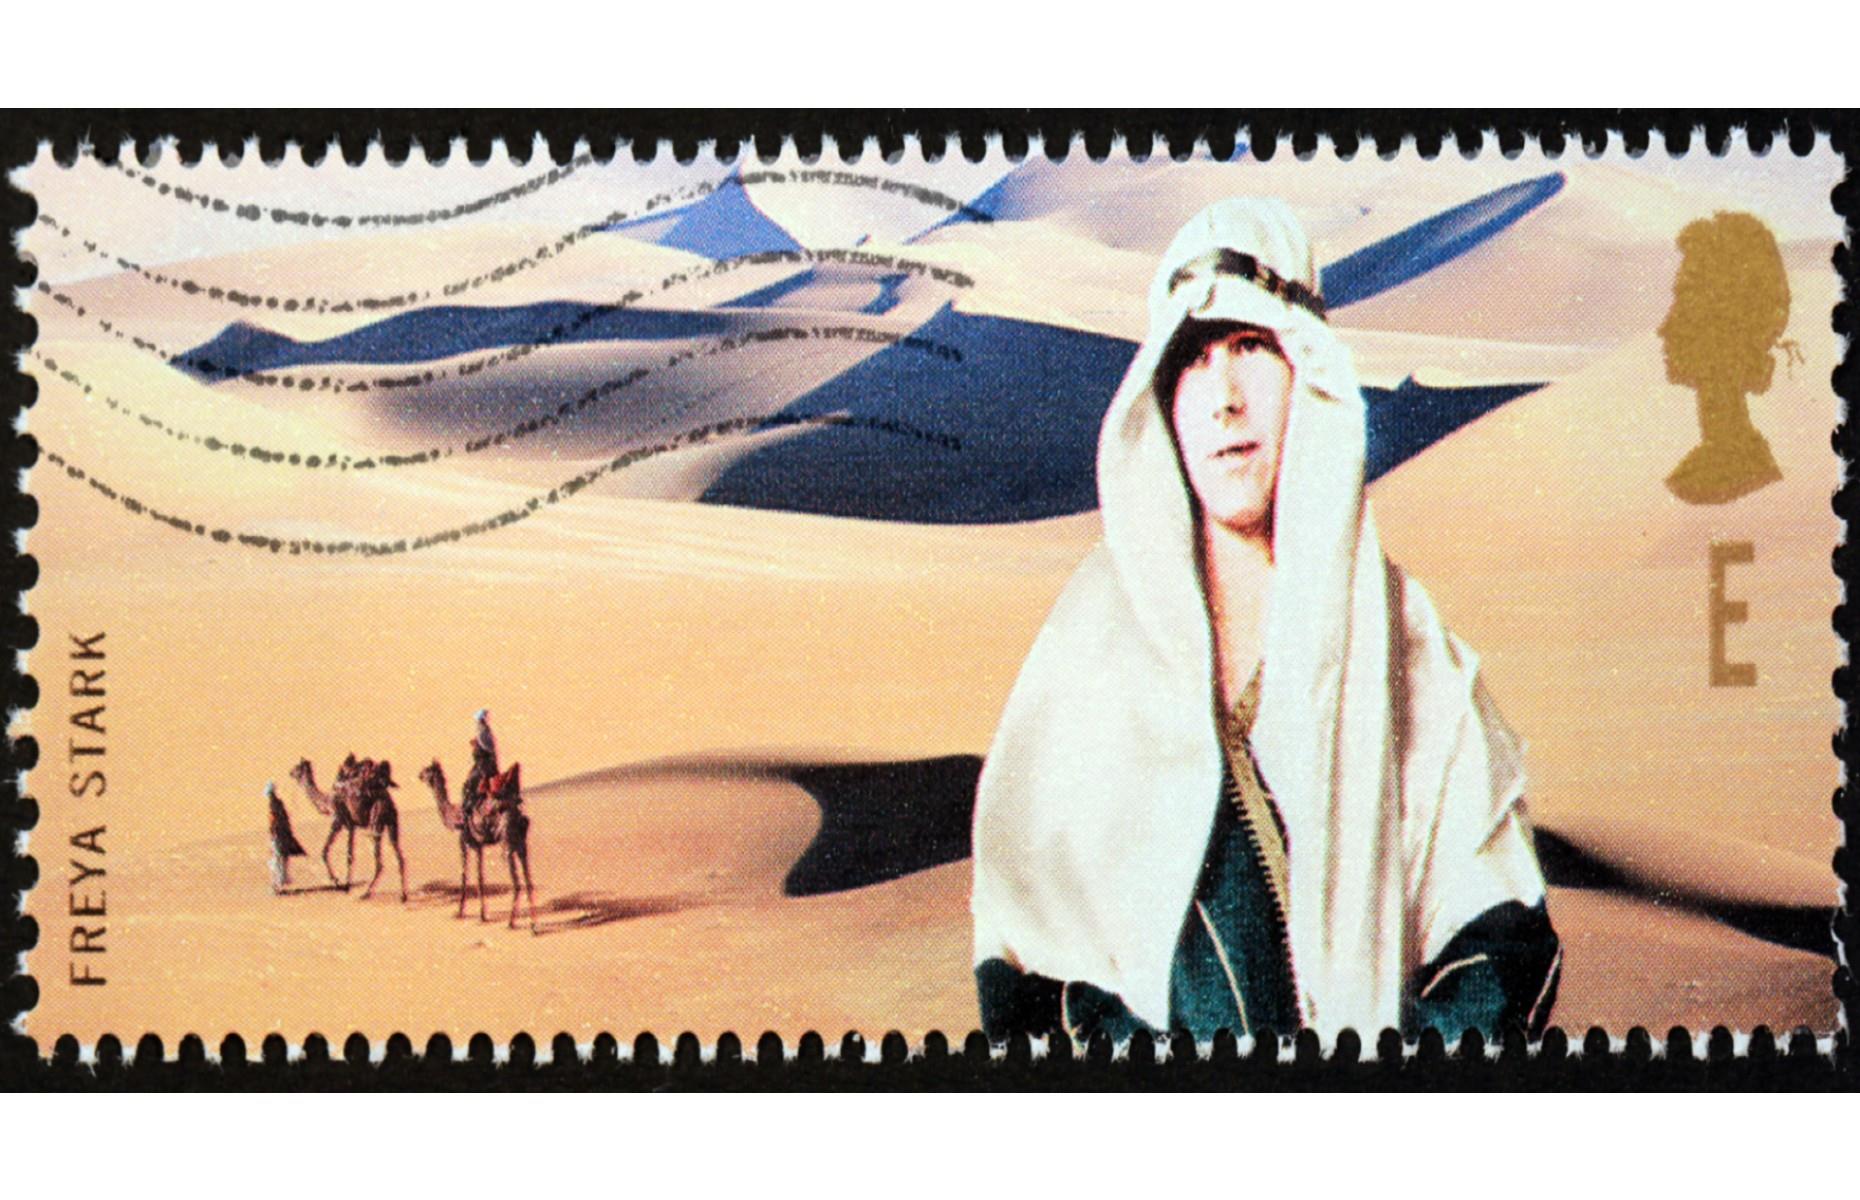 In 1930, she learned Farsi and traveled to the Valley of the Assassins in Persia – an area that hadn't been mapped before. A dangerous place, as the name suggests, Stark set off on a mule with a local guide carrying a camp bed and a malaria net. Further trips to Iraq, Egypt and India enhanced her reputation. Aged 76 she was in Persia again, at 86 she traveled to the Annapurna in the Himalayas. In 1972, in recognition of her pioneering explorations, she was made a Dame.